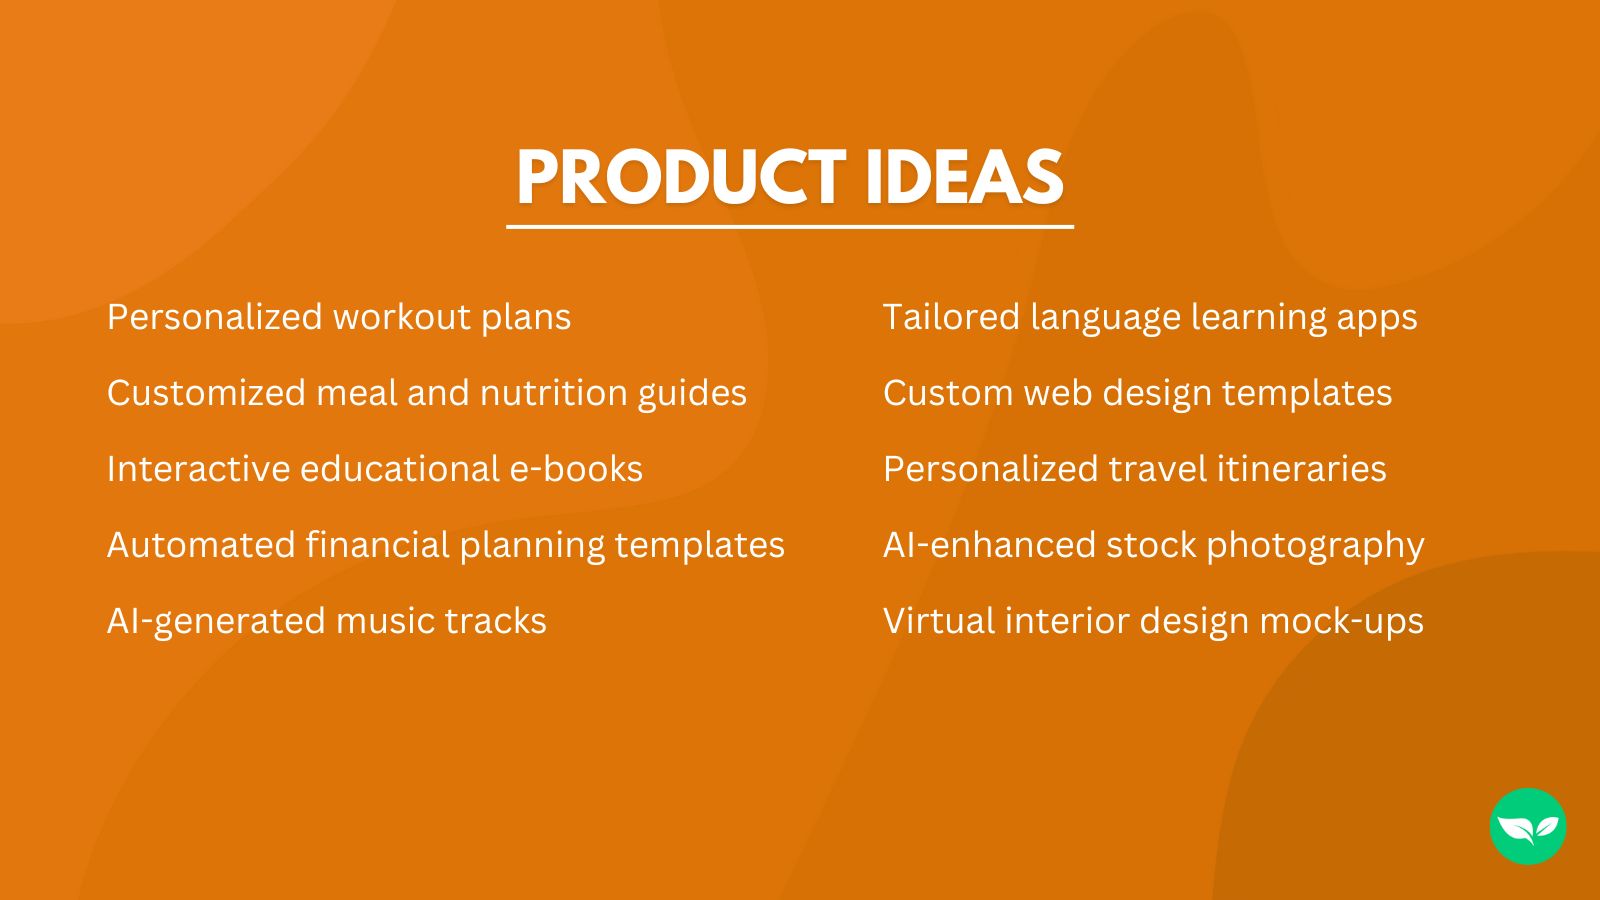 List of digital product ideas that you can use AI to help build.